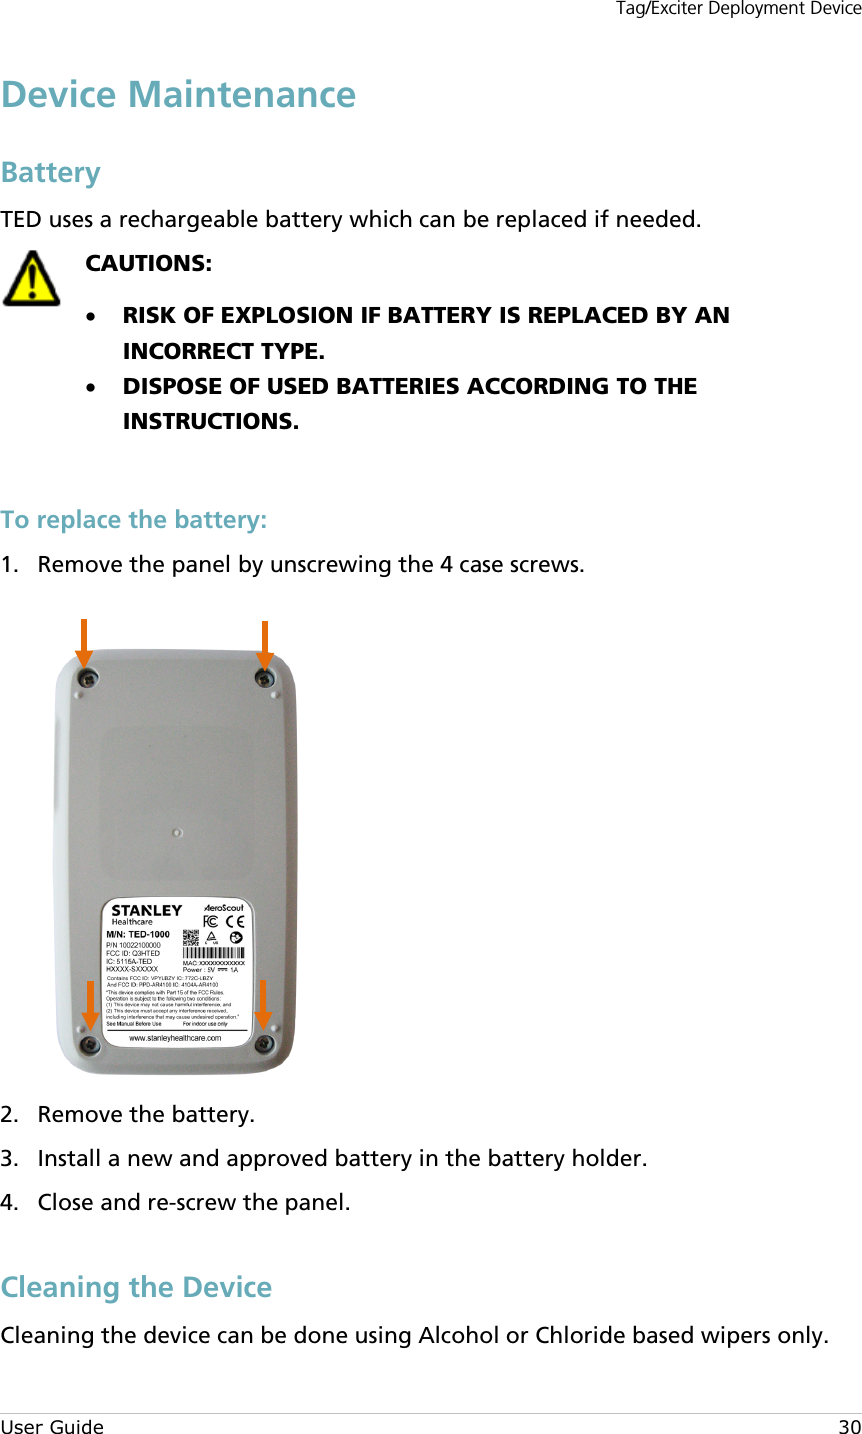 Tag/Exciter Deployment Device User Guide 30 Device Maintenance Battery TED uses a rechargeable battery which can be replaced if needed.   CAUTIONS:  • RISK OF EXPLOSION IF BATTERY IS REPLACED BY AN INCORRECT TYPE. • DISPOSE OF USED BATTERIES ACCORDING TO THE INSTRUCTIONS.   To replace the battery:  Remove the panel by unscrewing the 4 case screws. 1.   Remove the battery. 2. Install a new and approved battery in the battery holder. 3. Close and re-screw the panel. 4.   Cleaning the Device Cleaning the device can be done using Alcohol or Chloride based wipers only. 